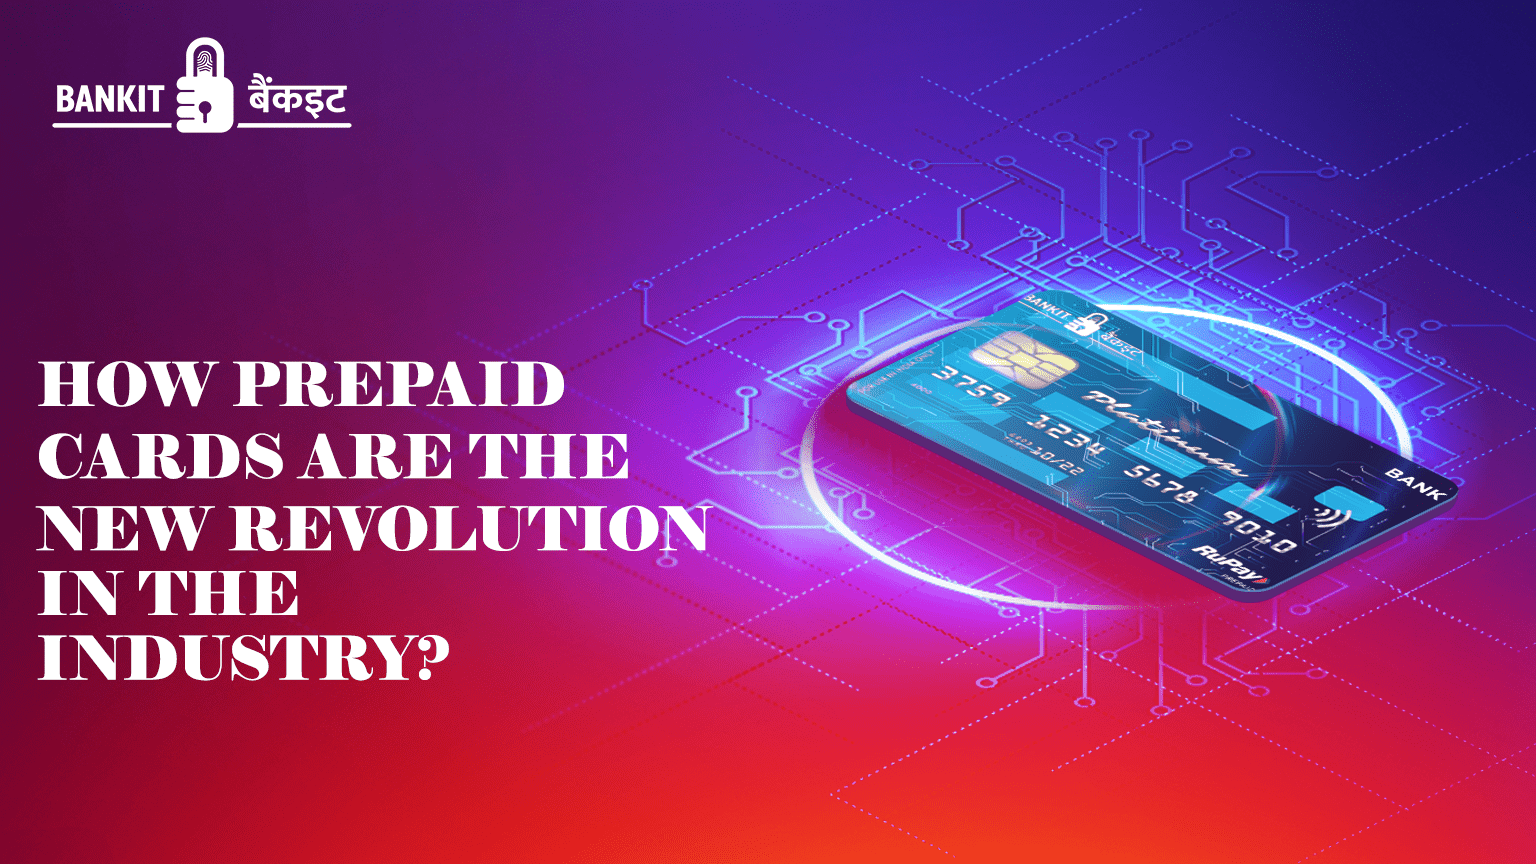 How prepaid cards are the new revolution in the Industry?